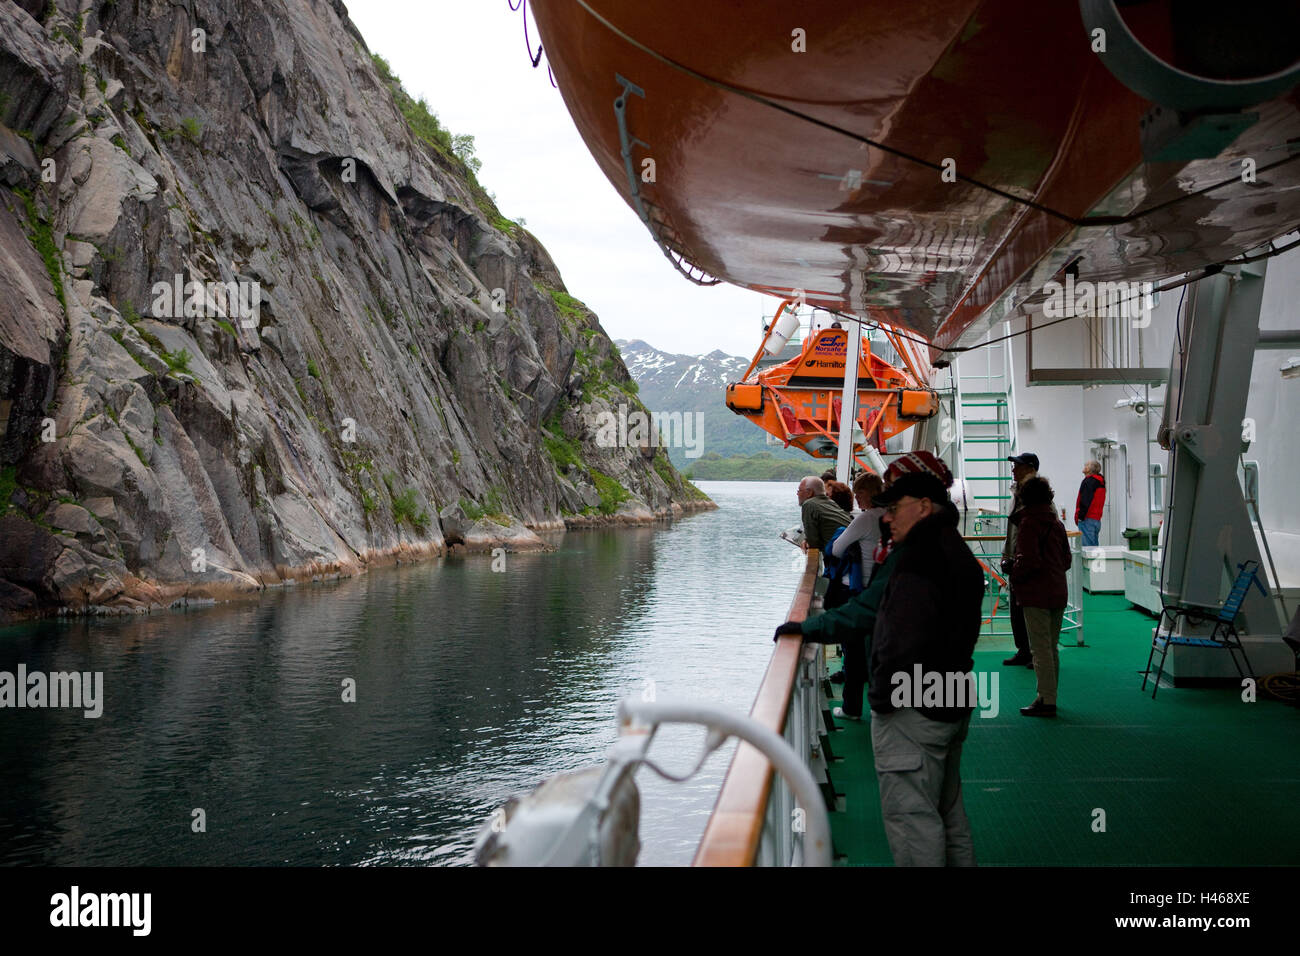 Norway, northern country, troll fjord, swift rods, 'MS Kong Harald', gunwale, passengers, Stock Photo